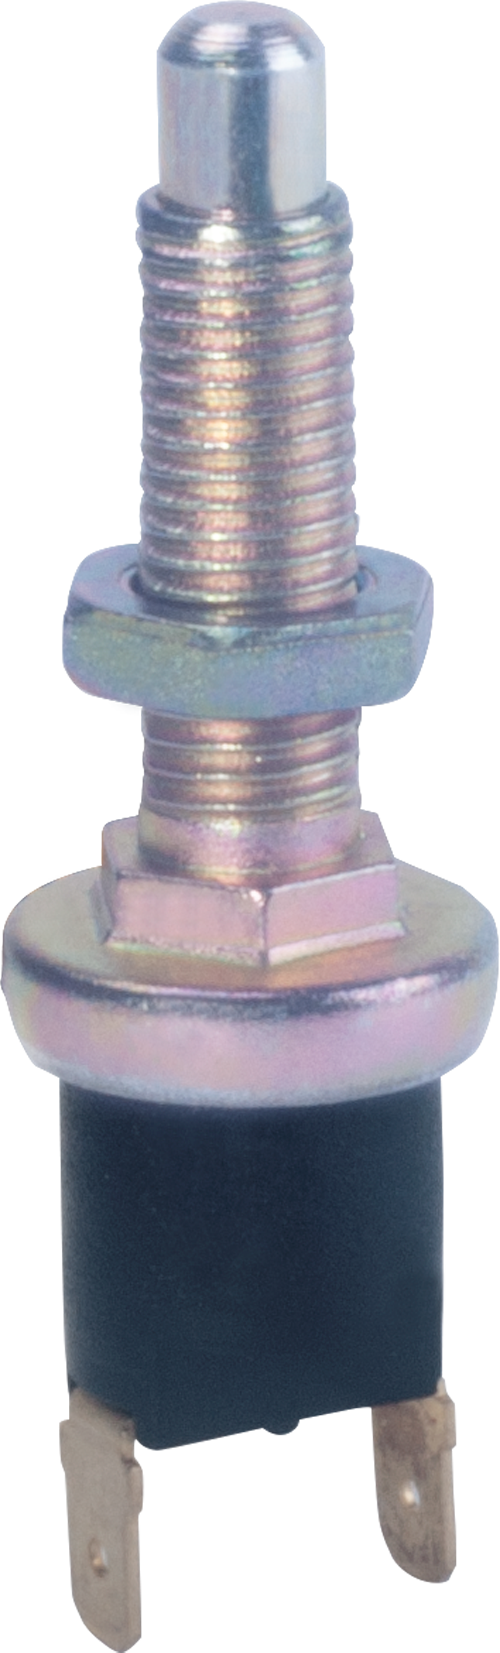 FIAT STOPLIGHT SWITCH  (METAL) product image